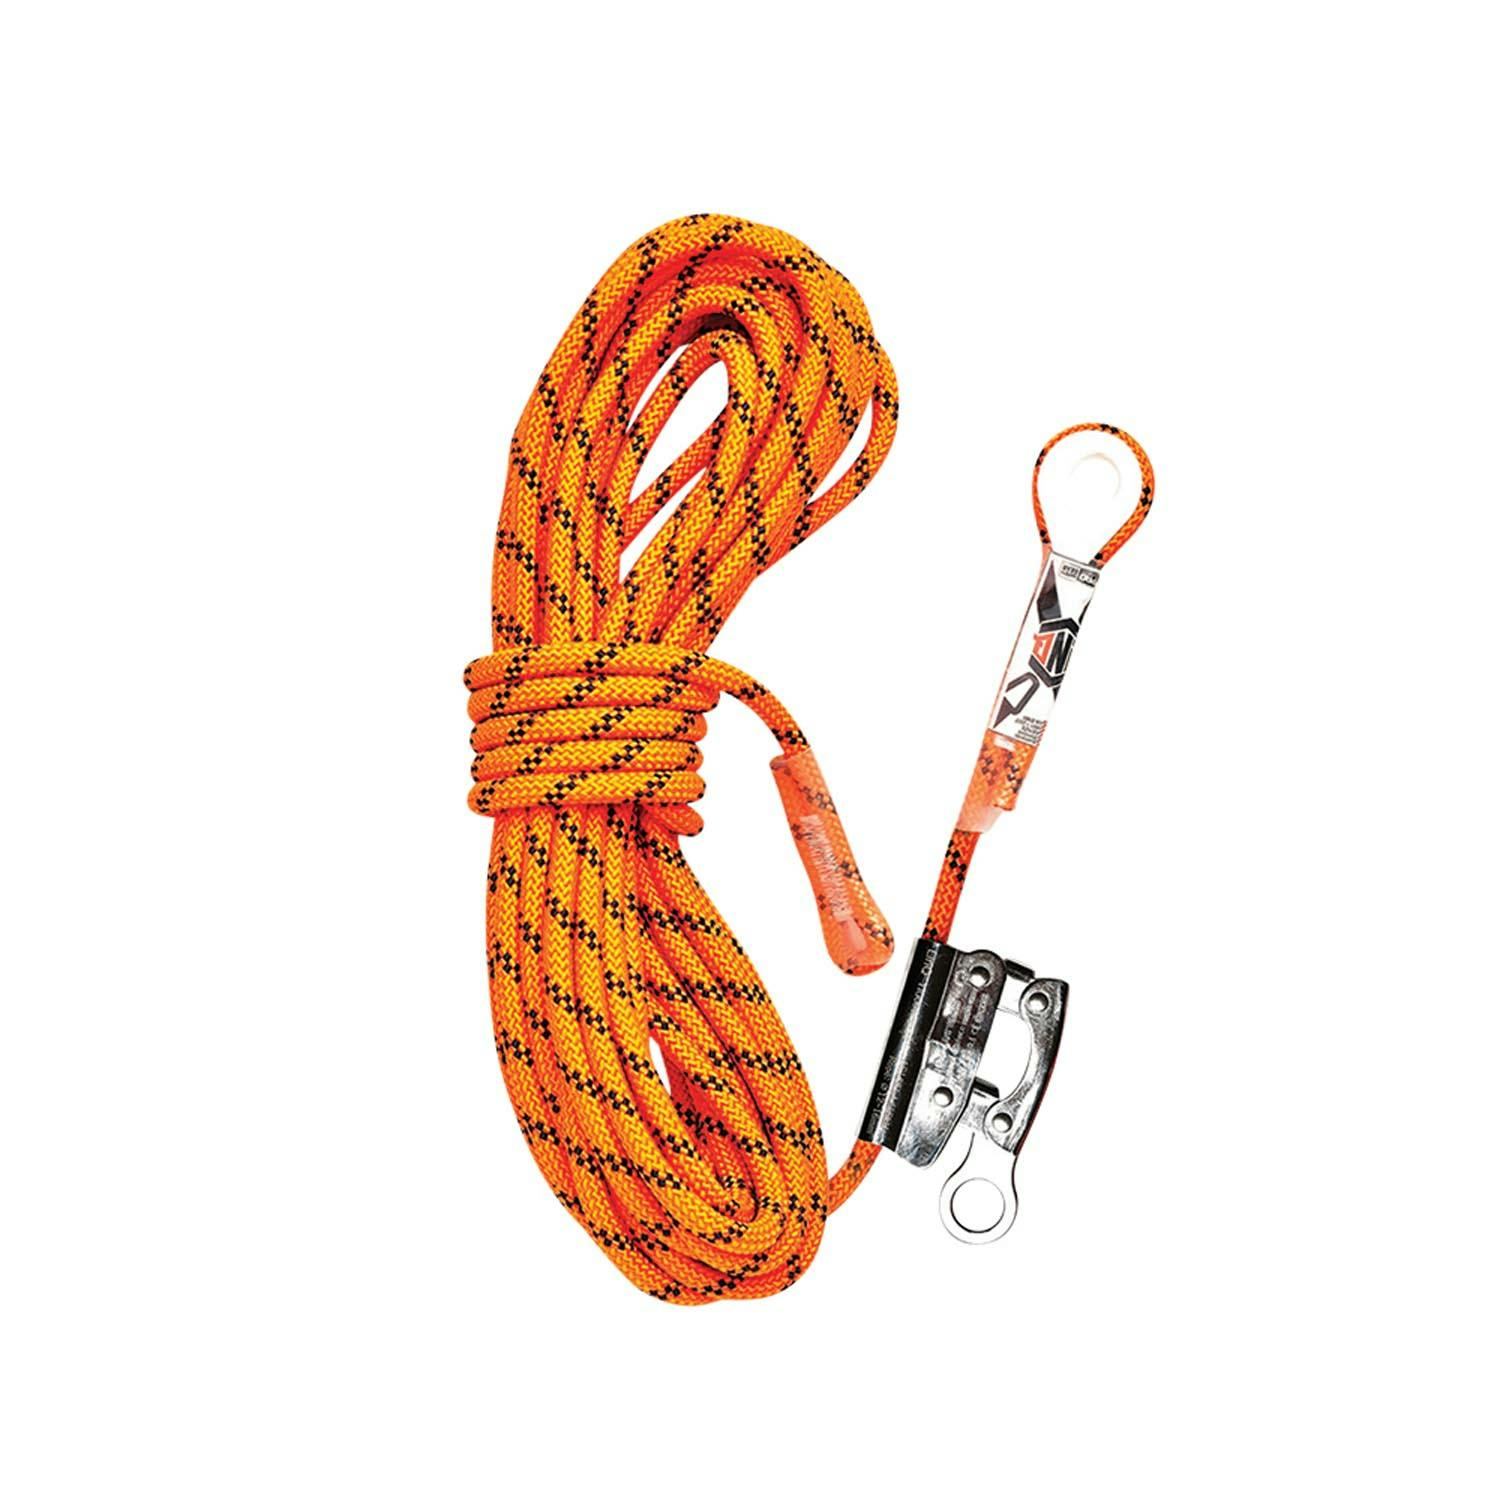 LINQ Kernmantle Rope With Thimble Eye & Rope Grab_5